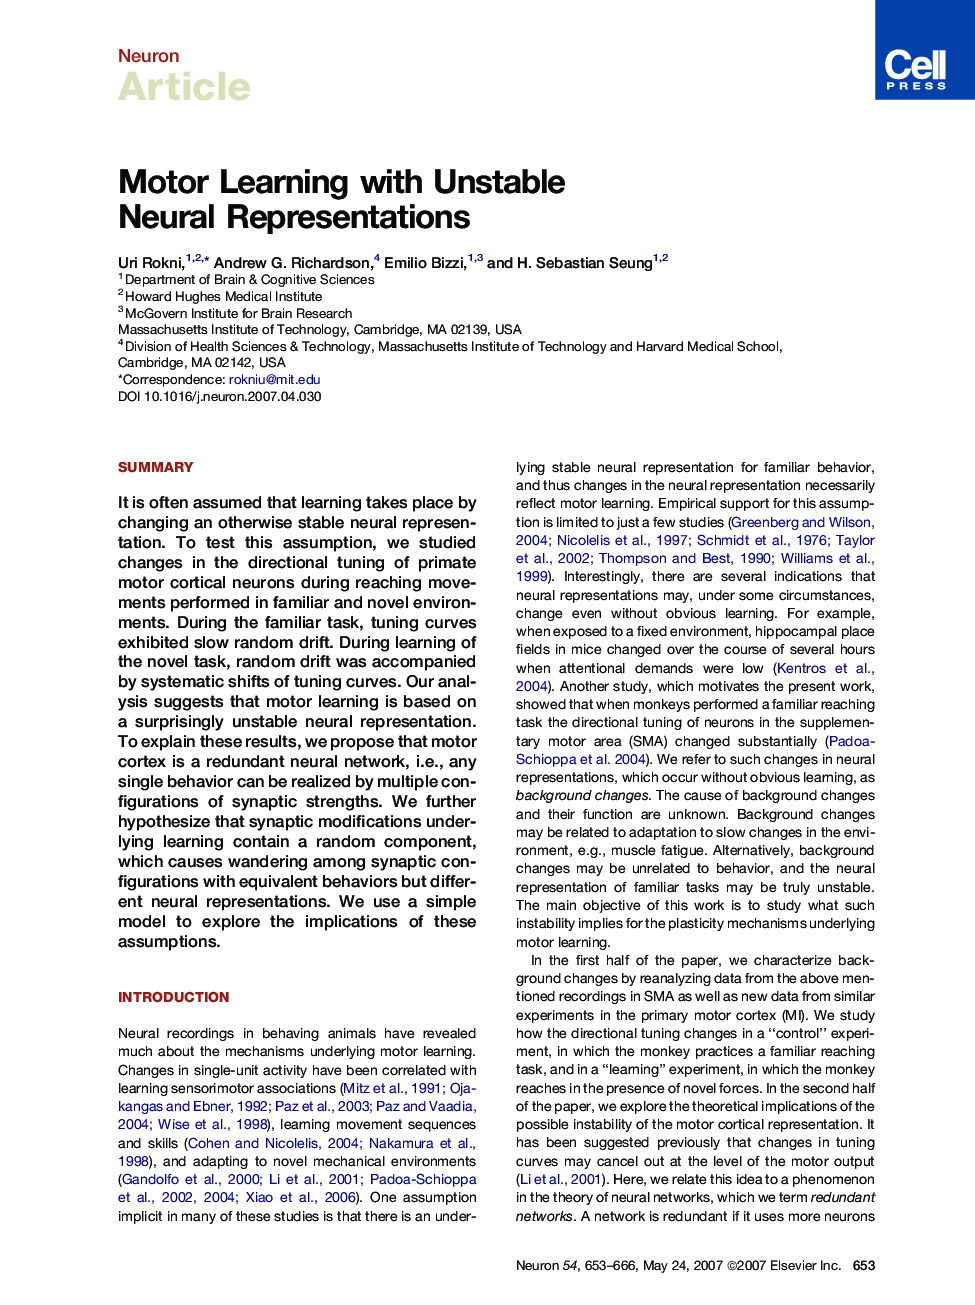 Motor Learning with Unstable Neural Representations